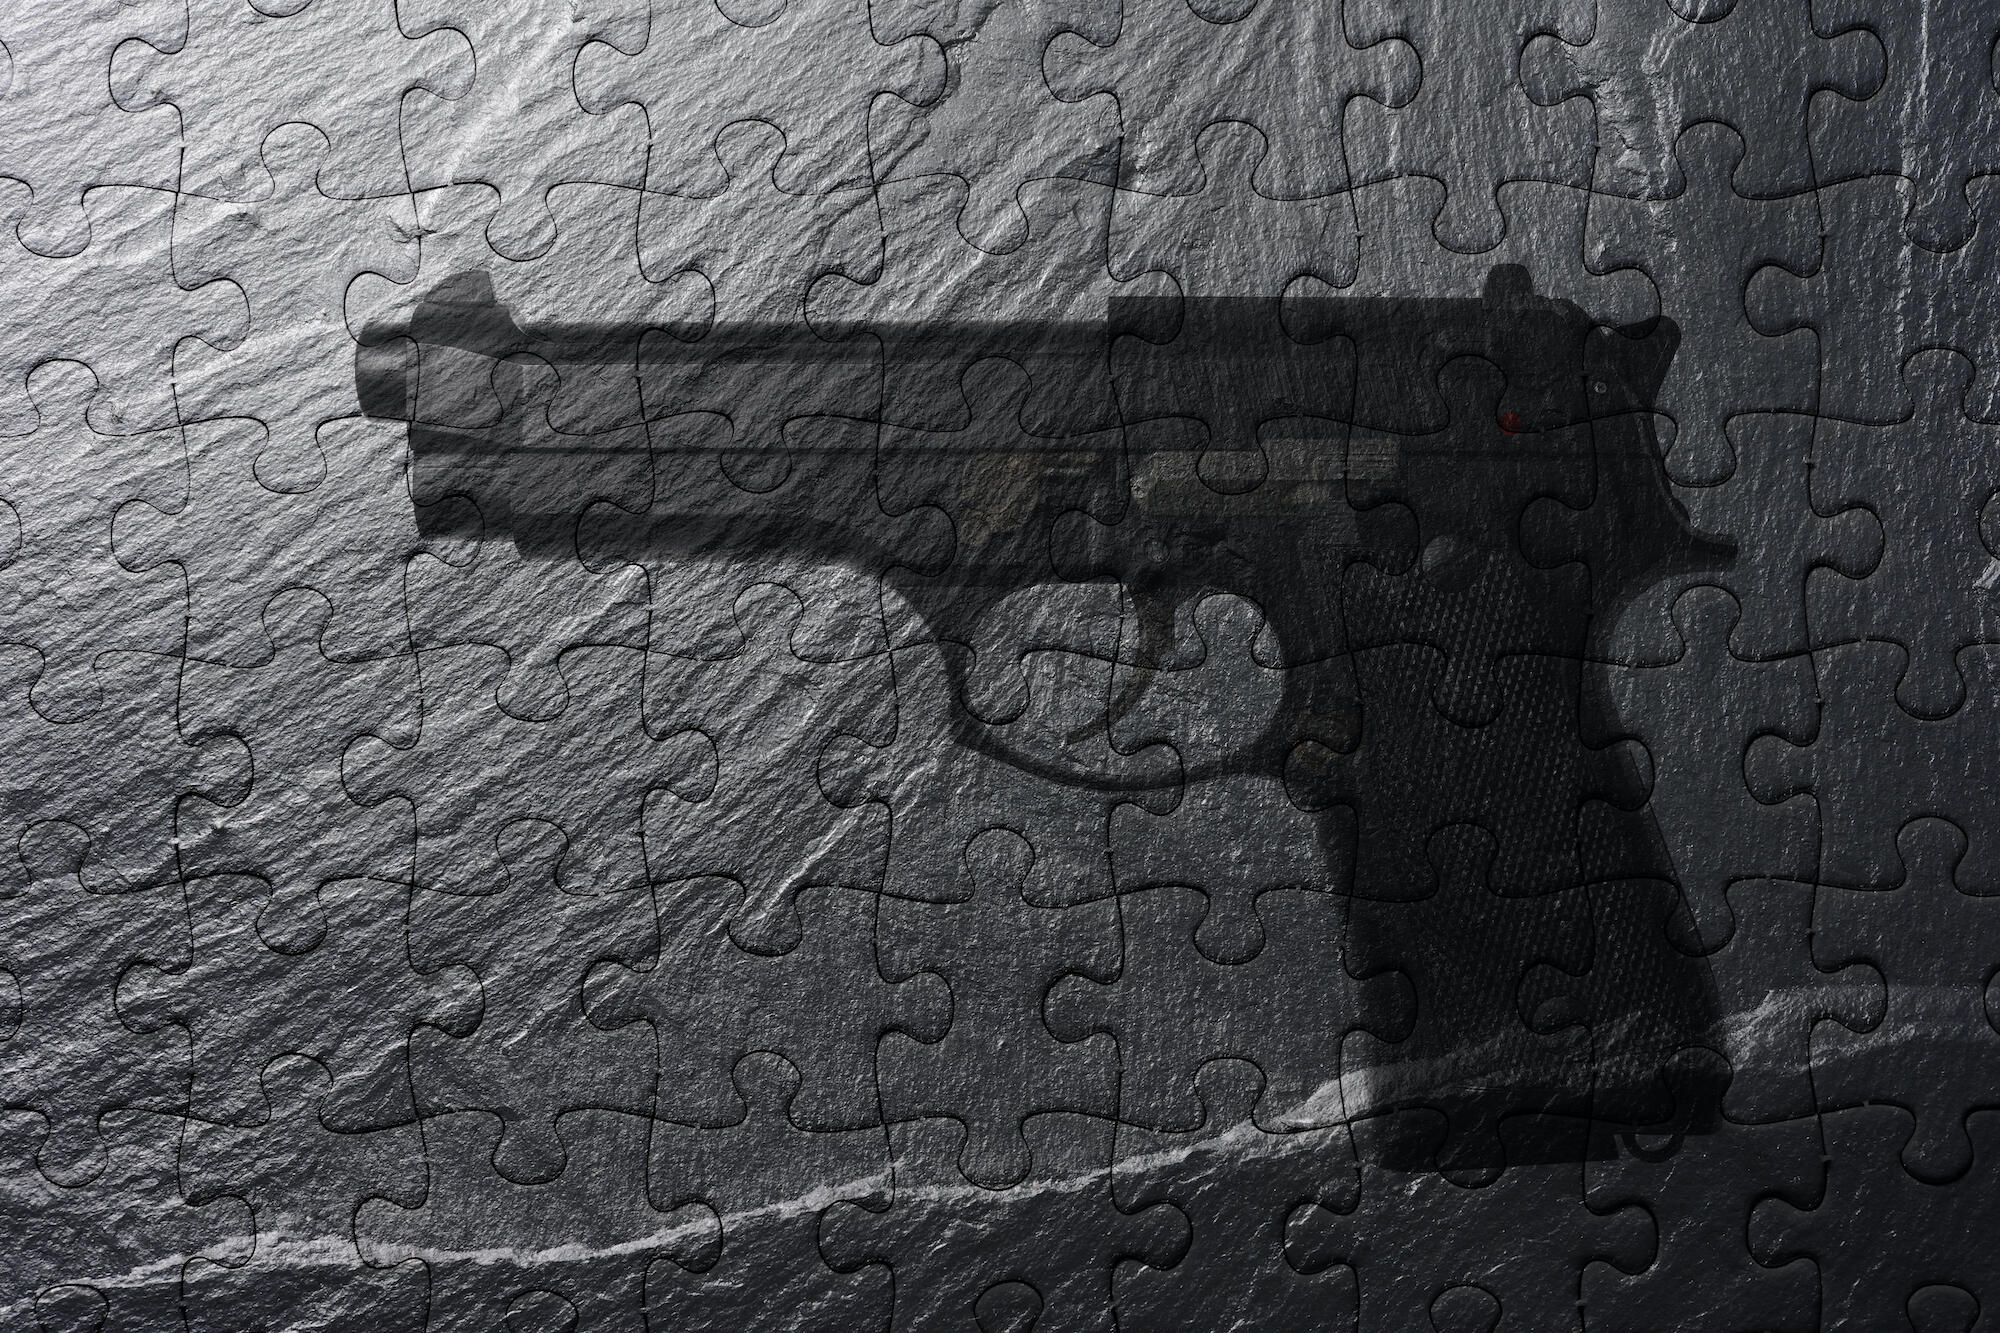 abstract image of a puzzle showing a handgun